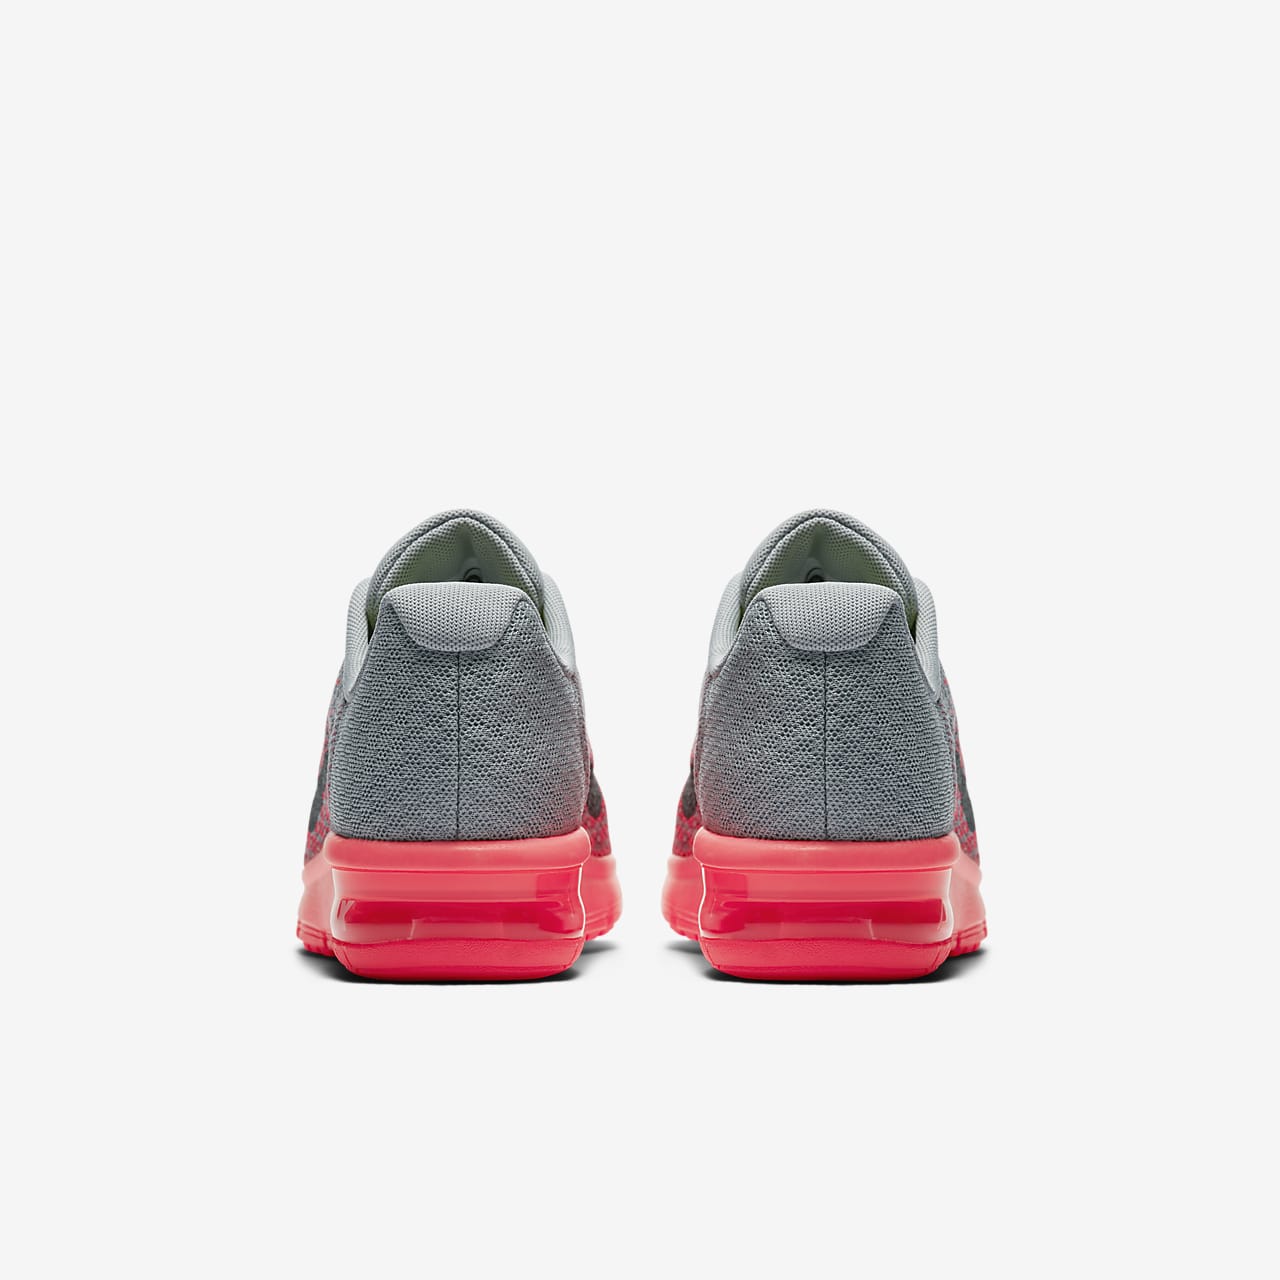 nike air max sequent 2 girls